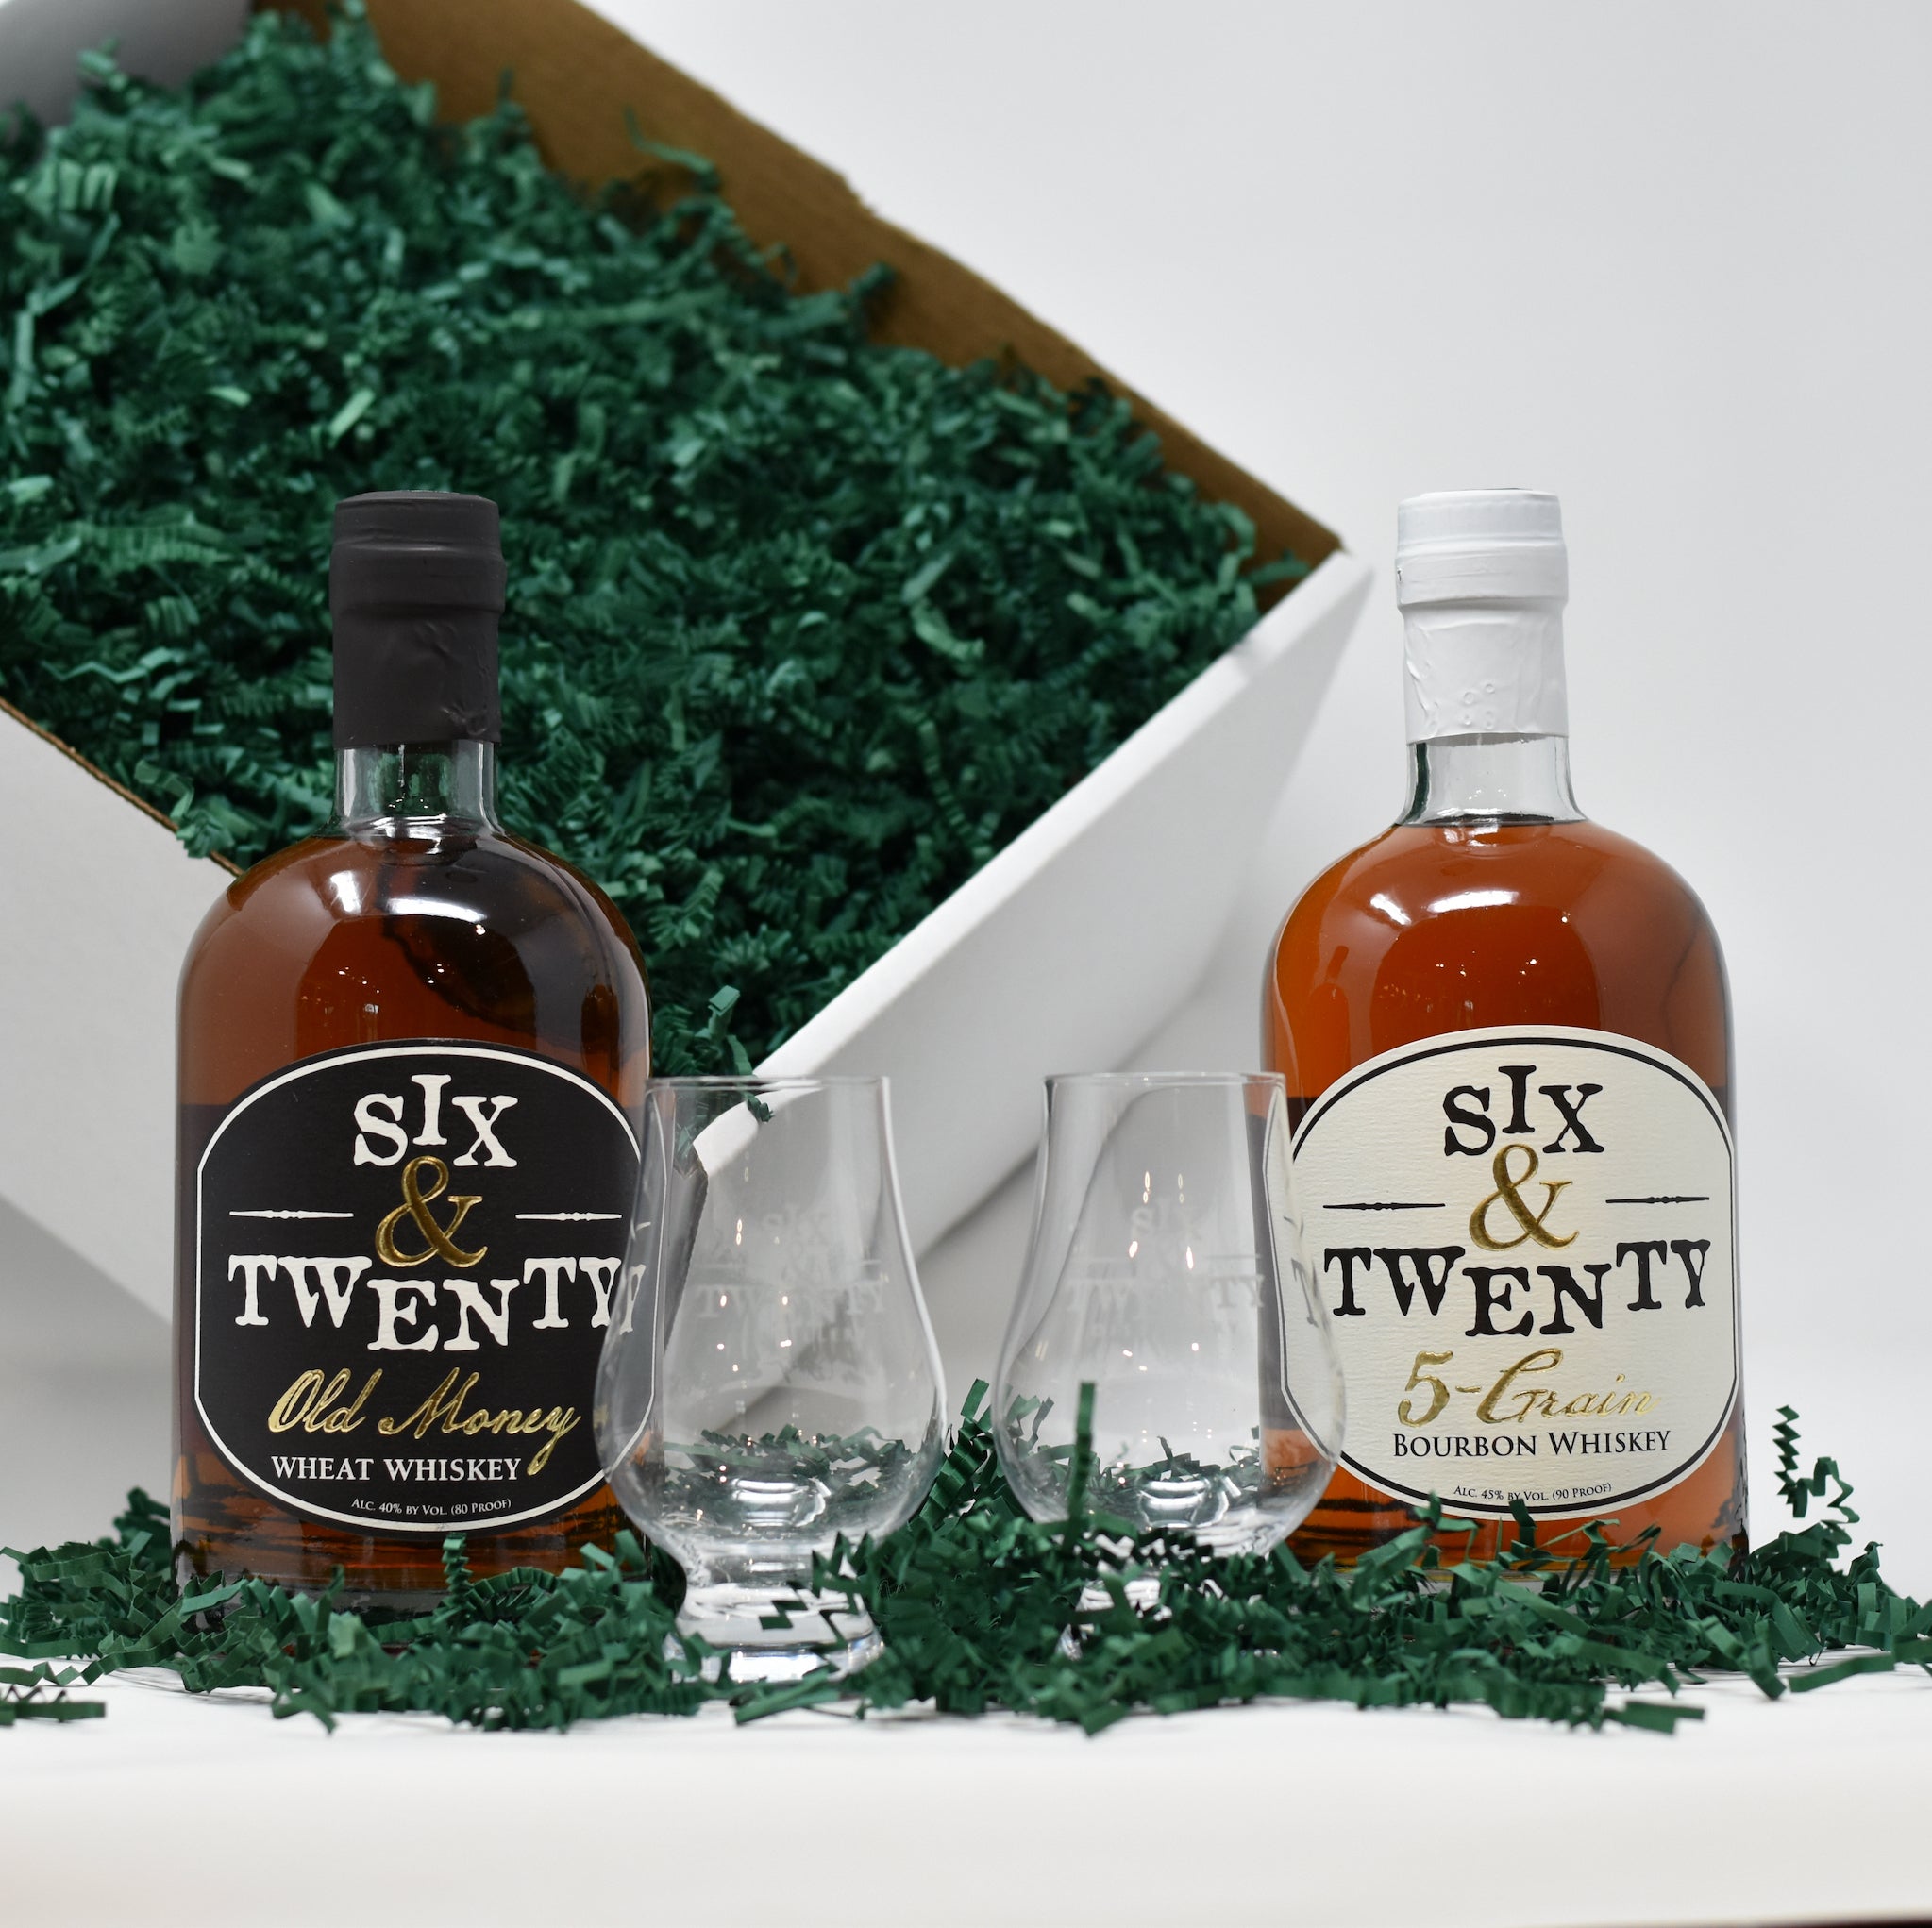 Whiskey Lovers Set – Ten Acre Gifts